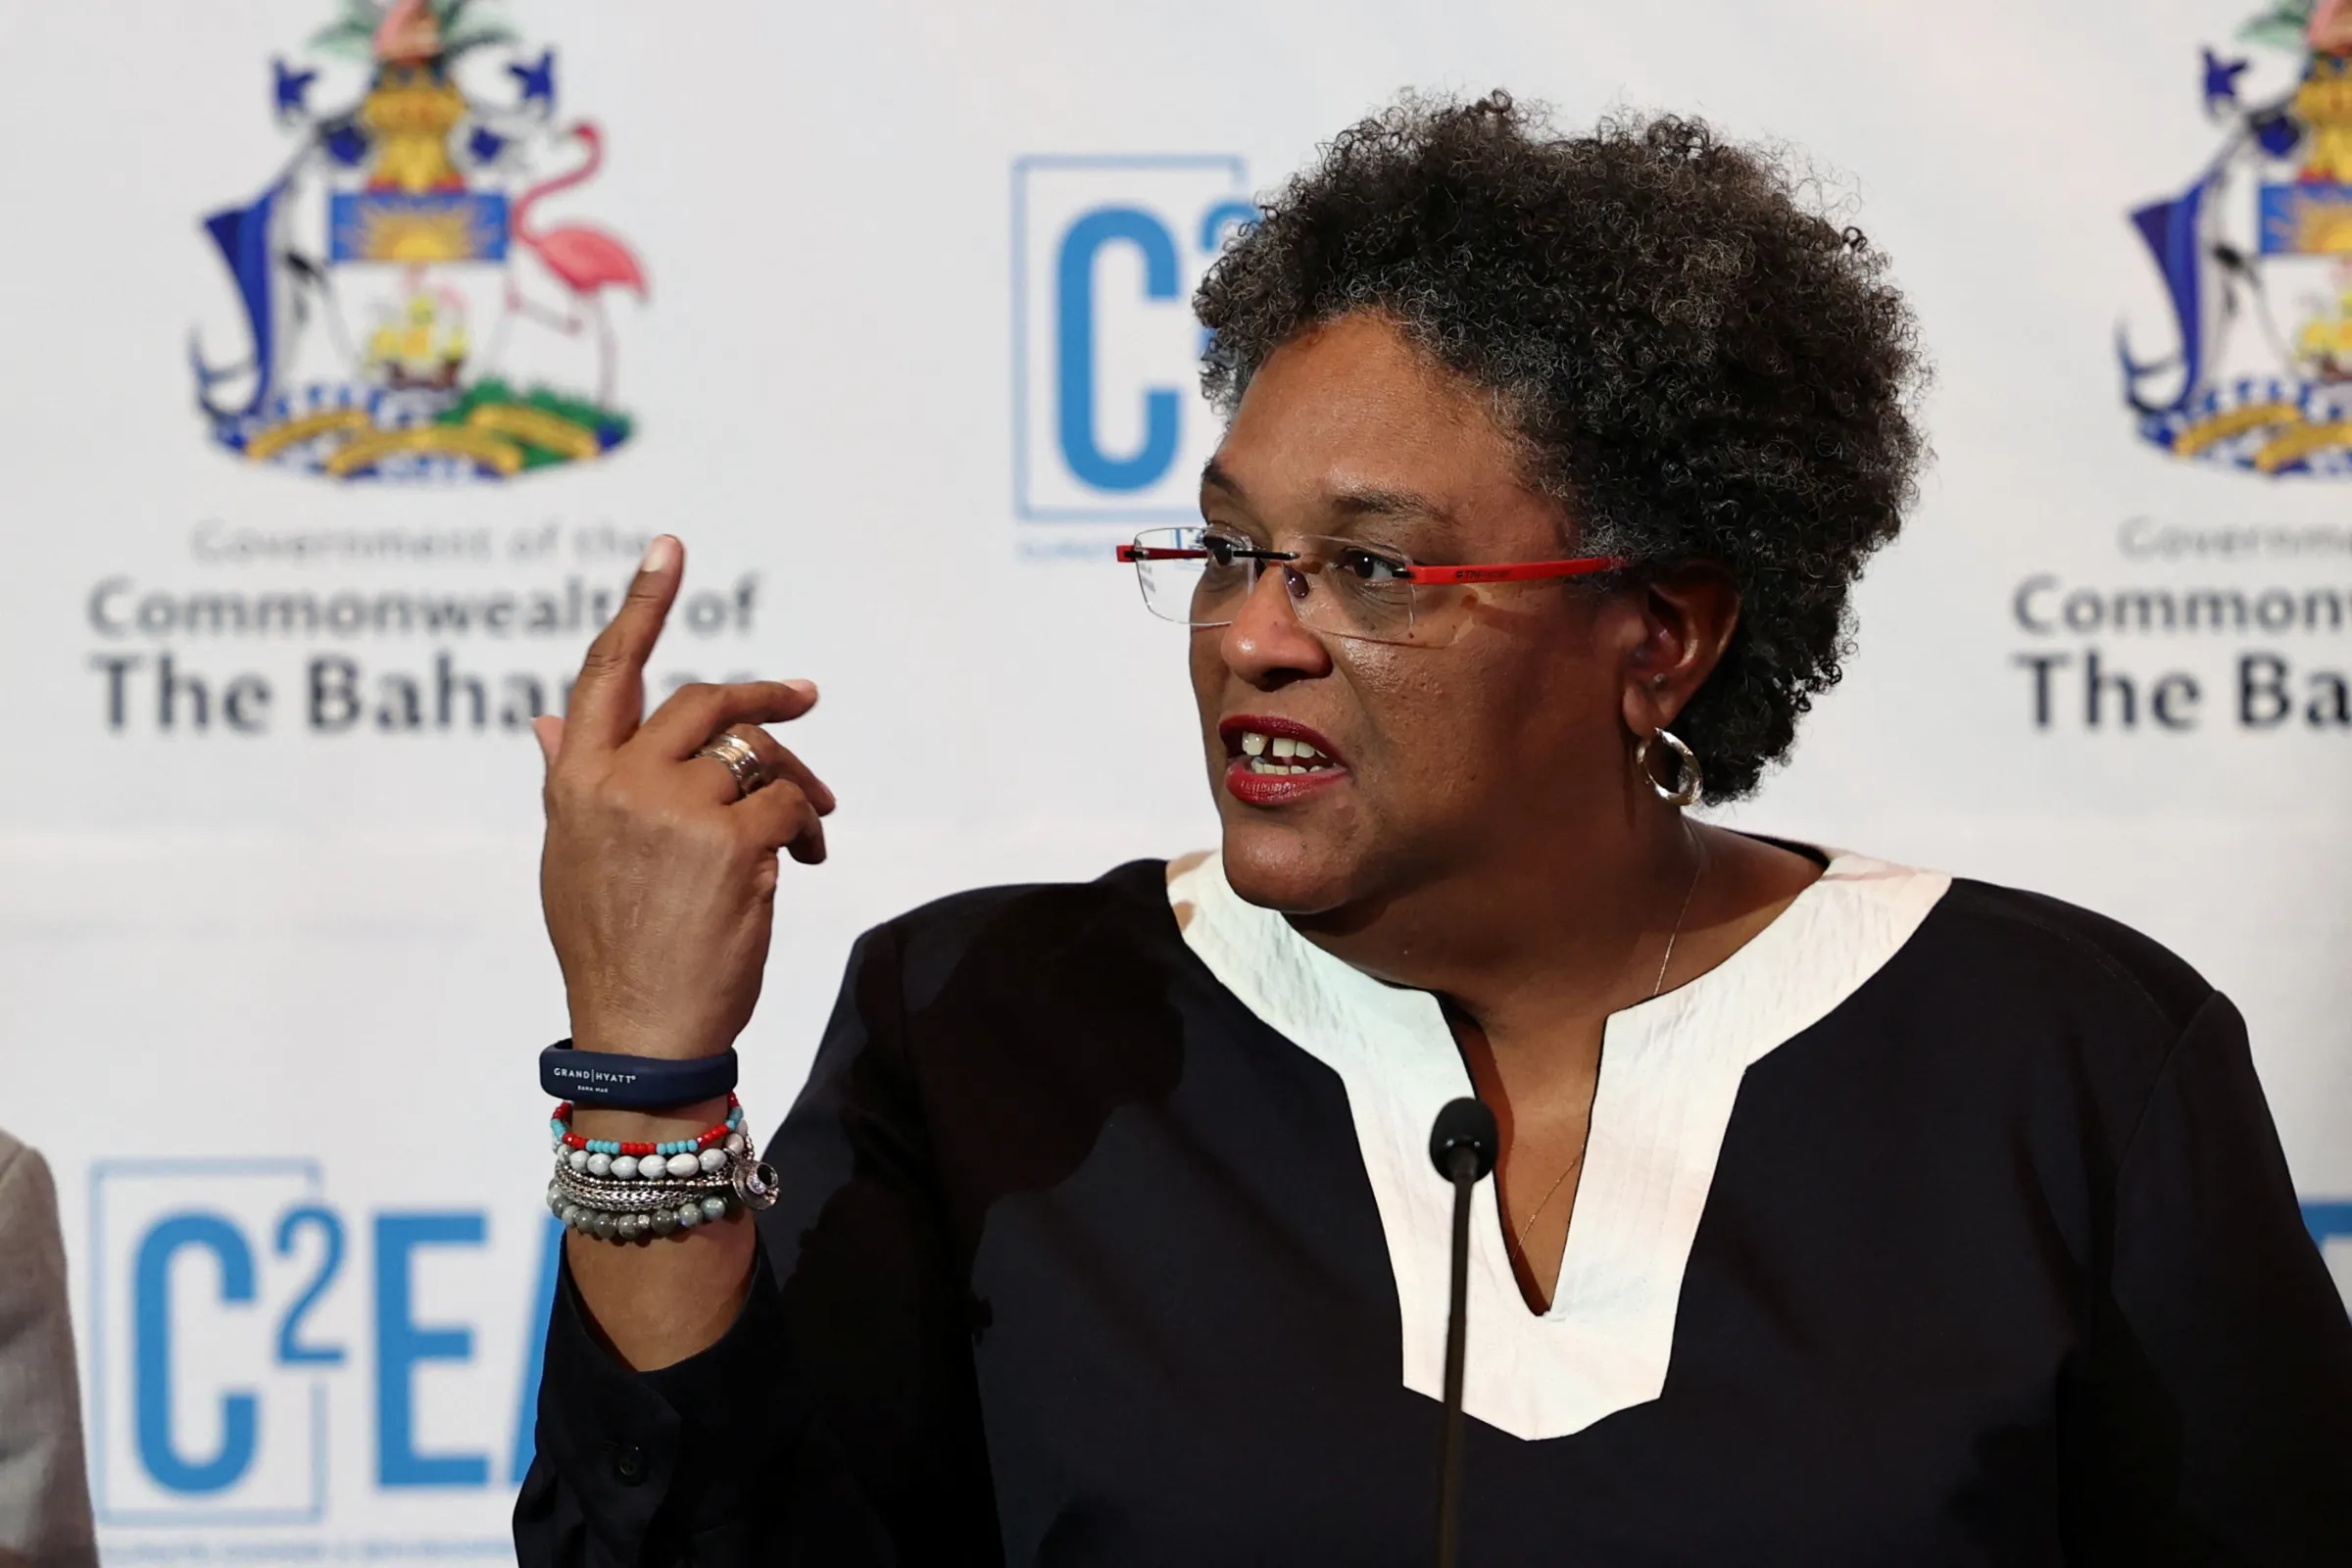 Barbados's Prime Minister Mia Mottley speaks during a press conference at an event where leaders of Caribbean nations meet for a two-day conference to discuss the region's approach to the COP27 climate talks, in Nassau, Bahamas August 17, 2022